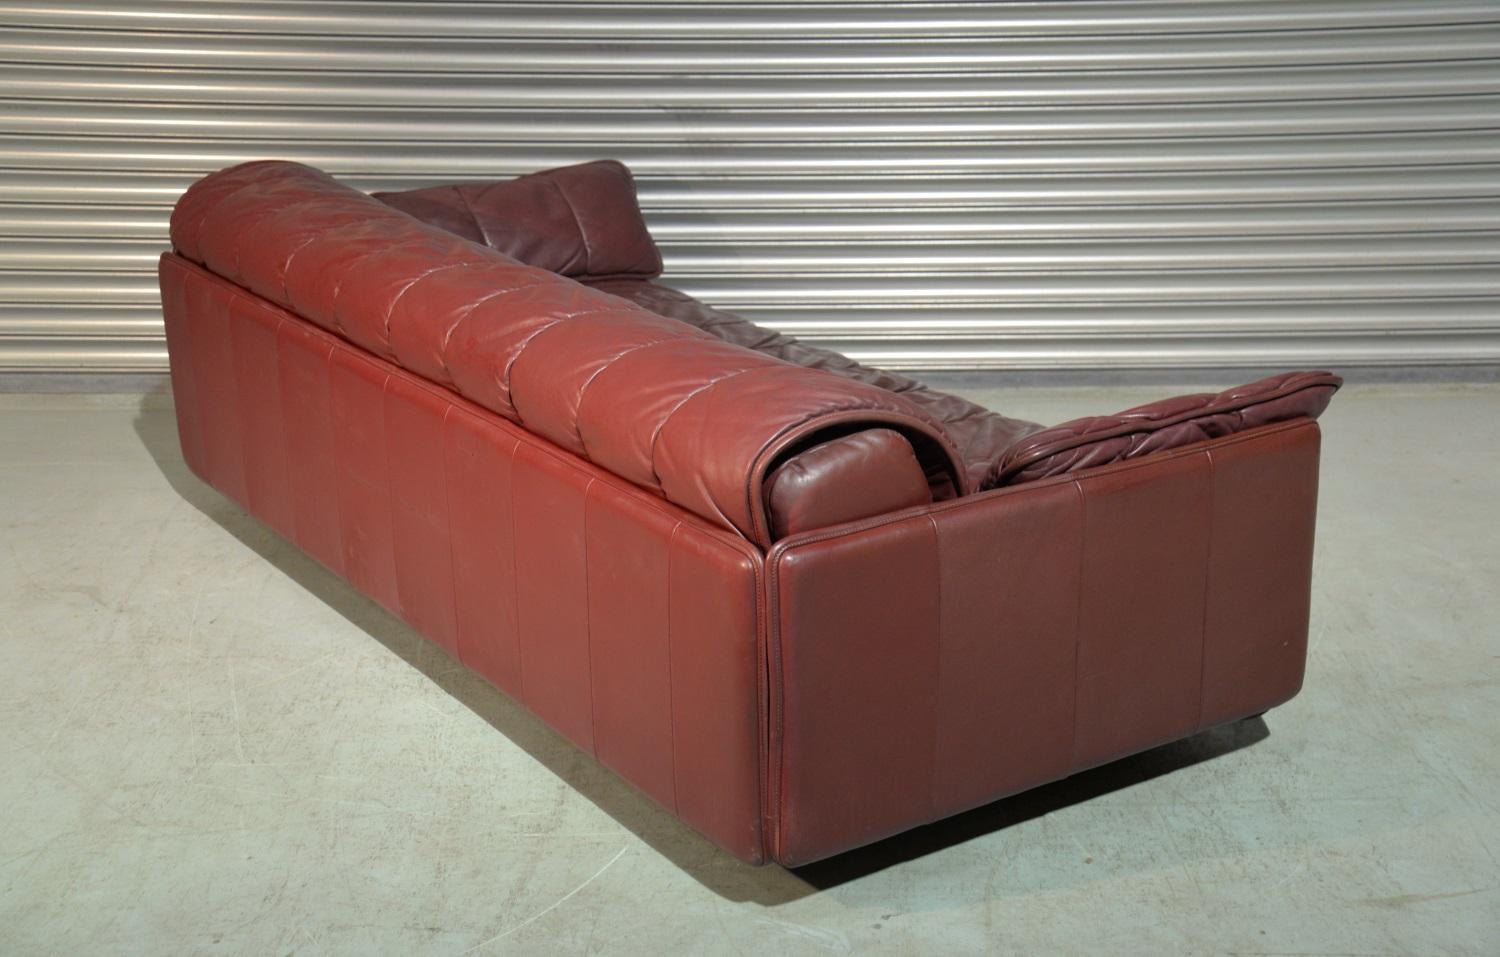 Vintage De Sede Patchwork Leather Sofa or Daybed, Switzerland, 1970s In Good Condition For Sale In Fen Drayton, Cambridgeshire